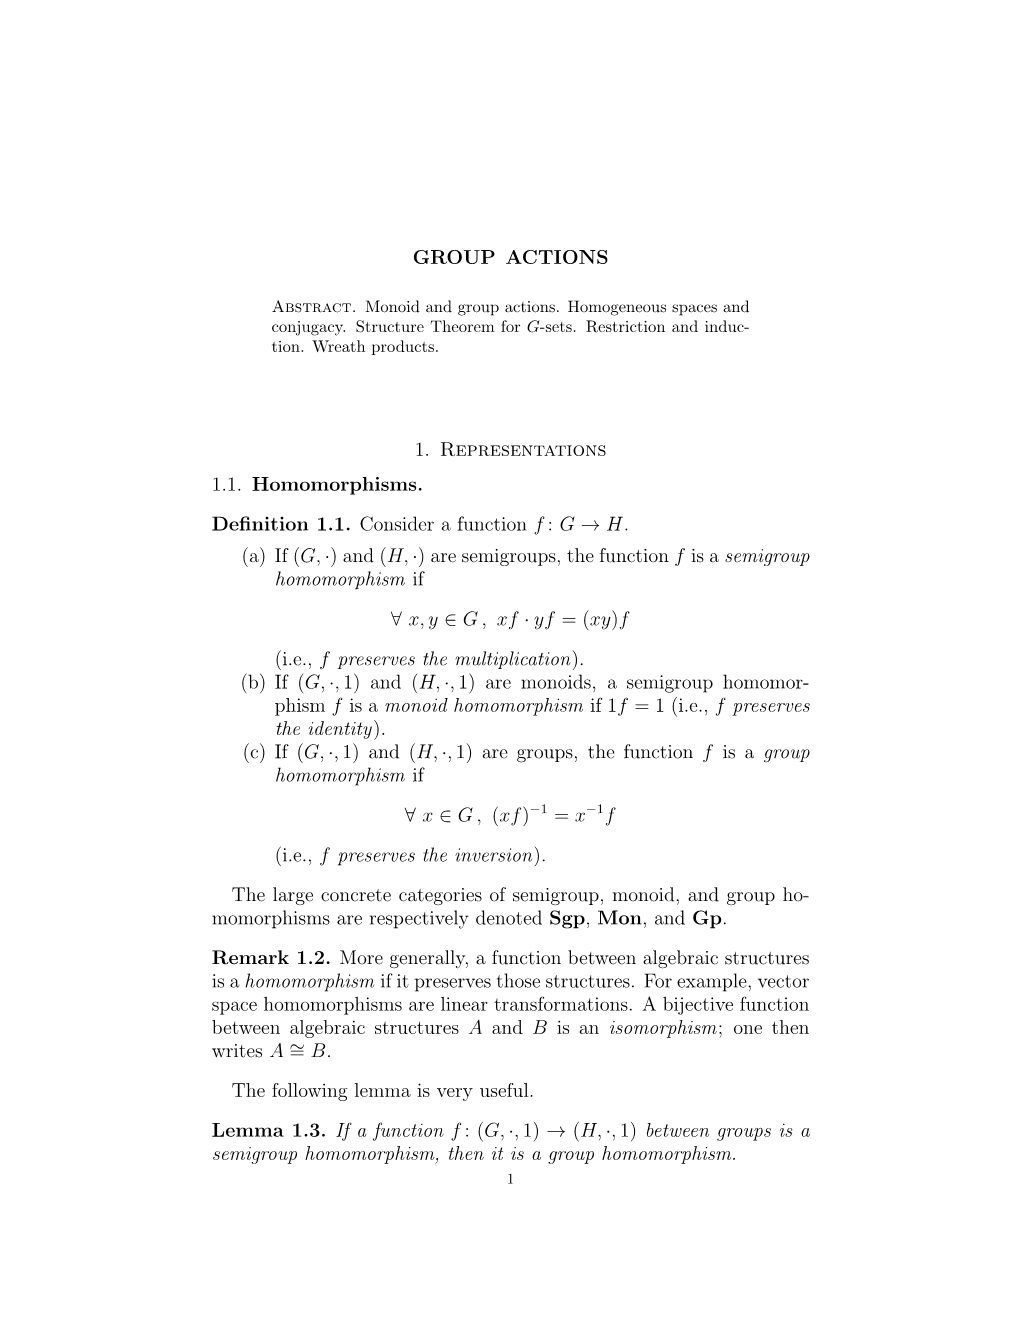 GROUP ACTIONS 1. Representations 1.1. Homomorphisms. Definition 1.1